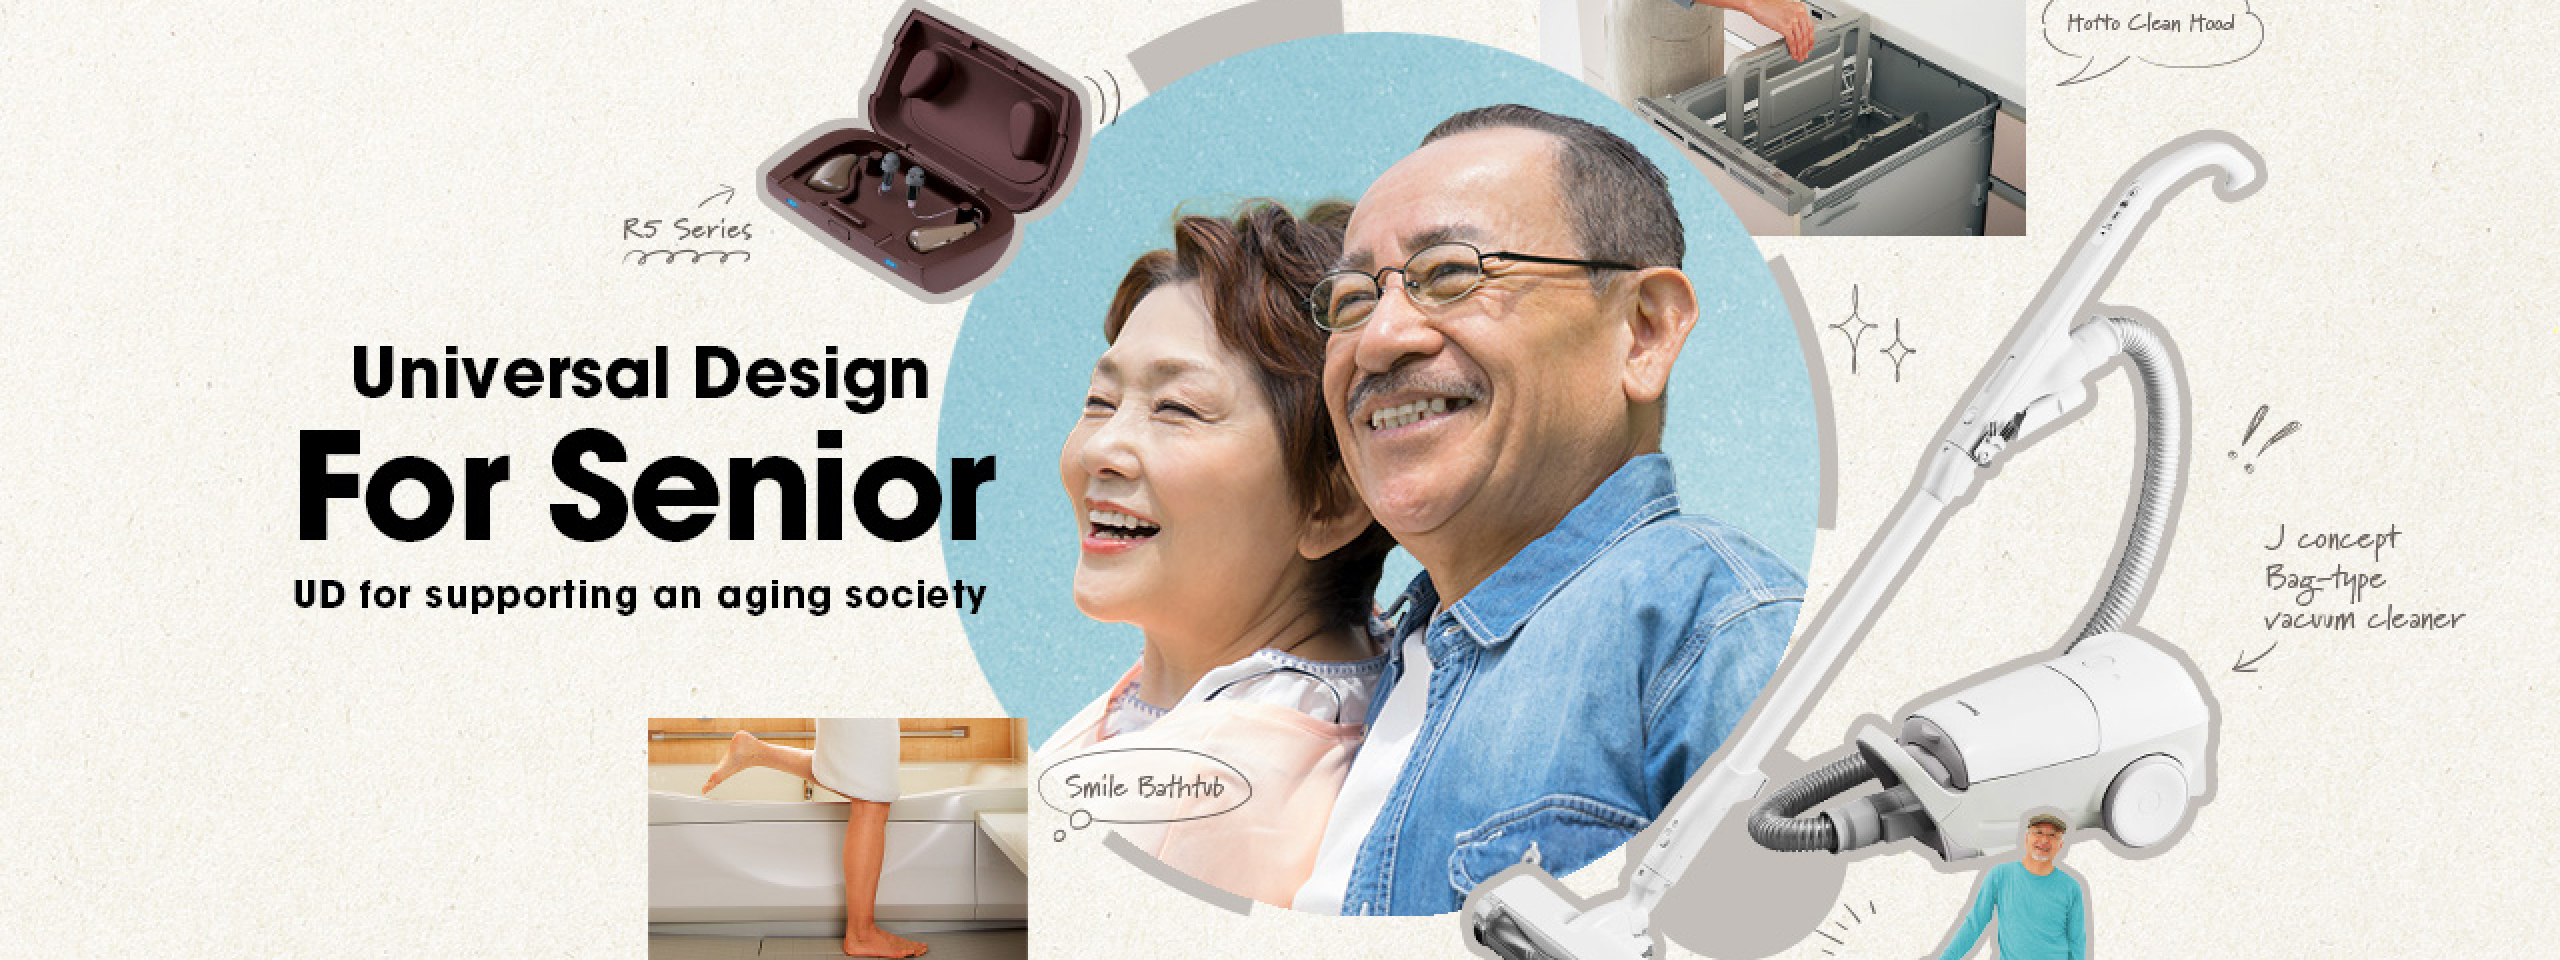 photo:Hearings aid, vacuum cleaner, and other Universal Design products that support aging societies, along with a smiling elderly couple.